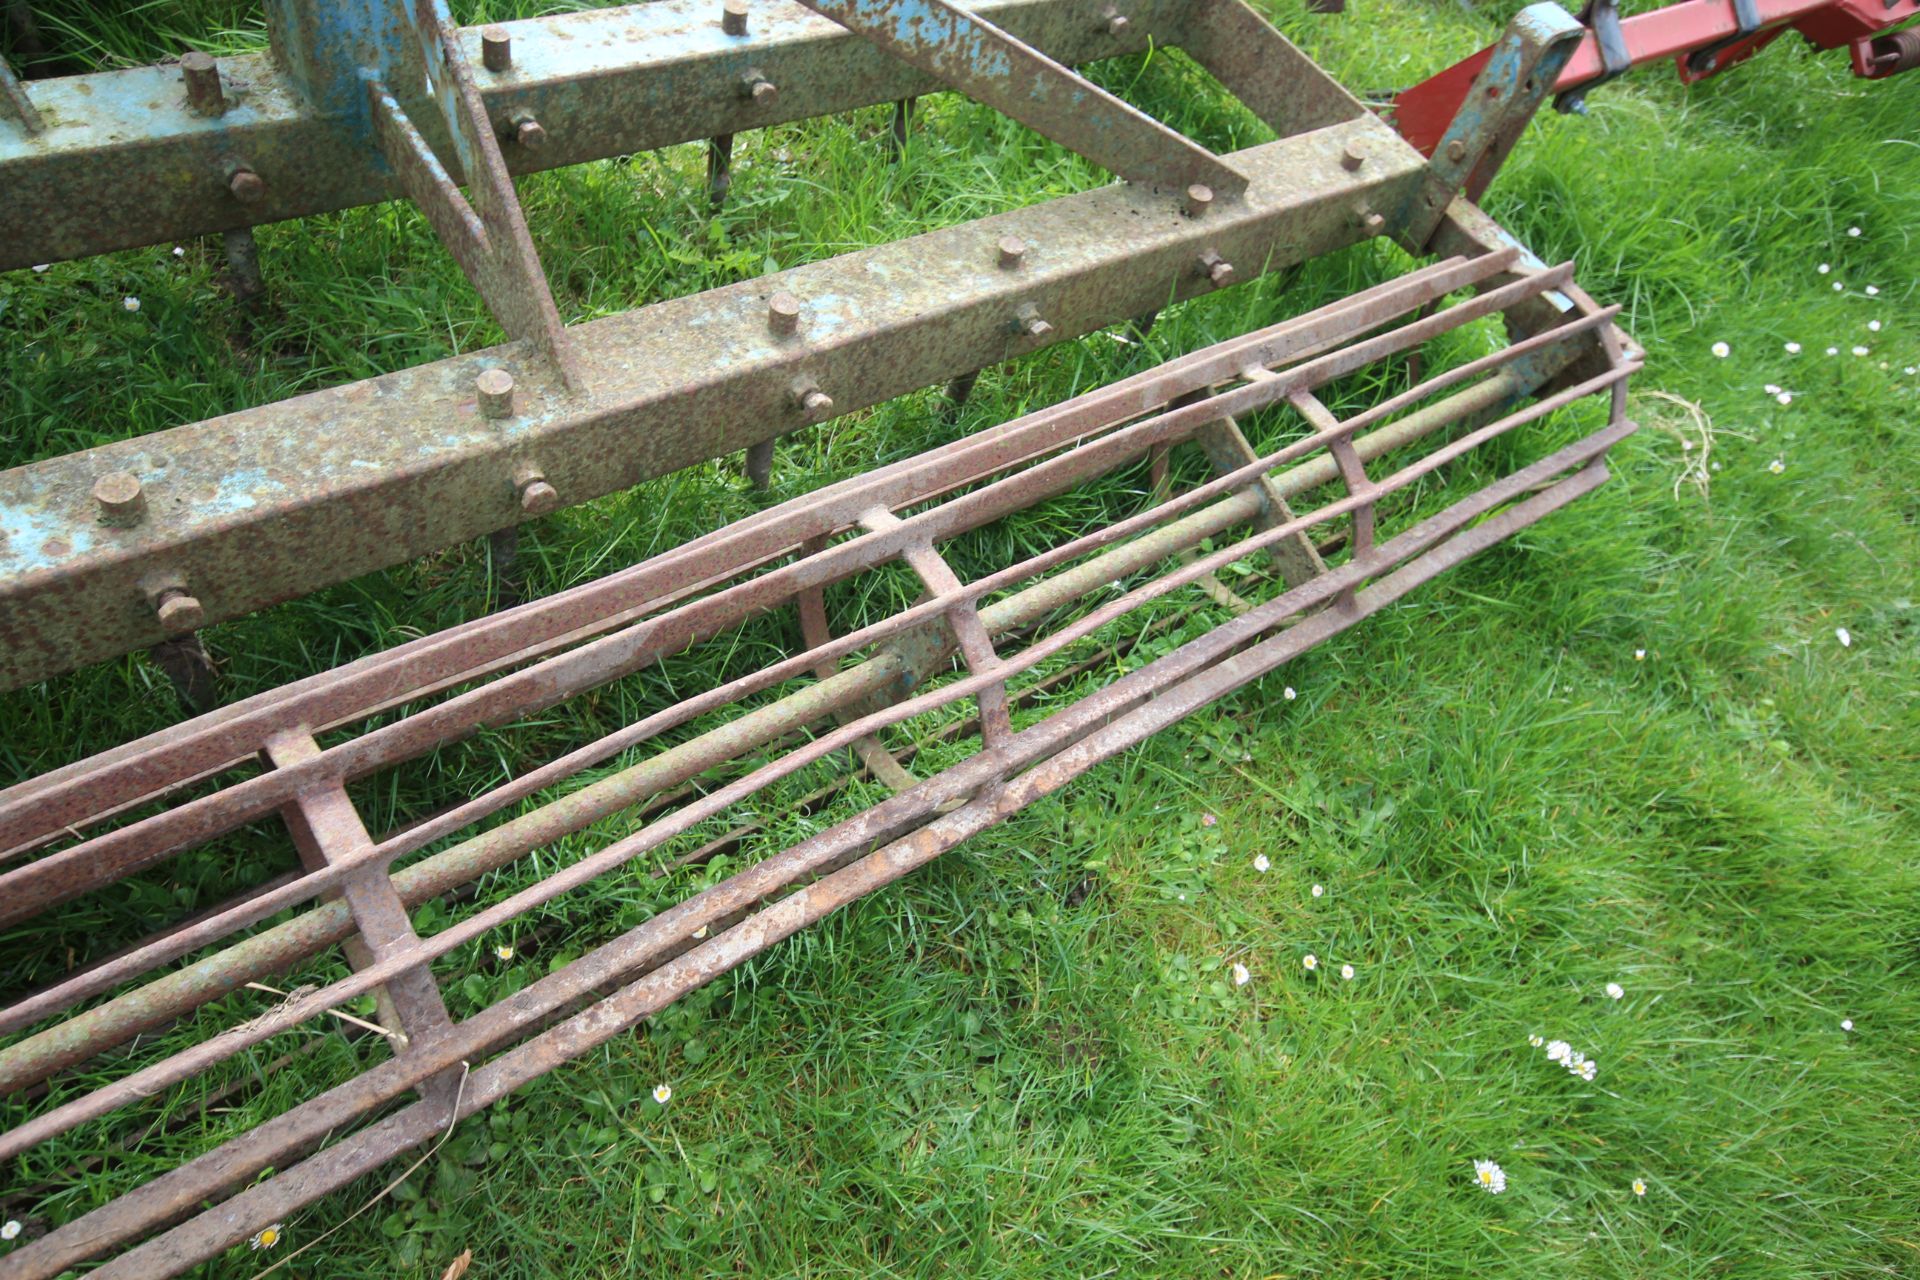 A W Smith & Sons Dutch harrow. For sale due to retirement. V - Image 12 of 12